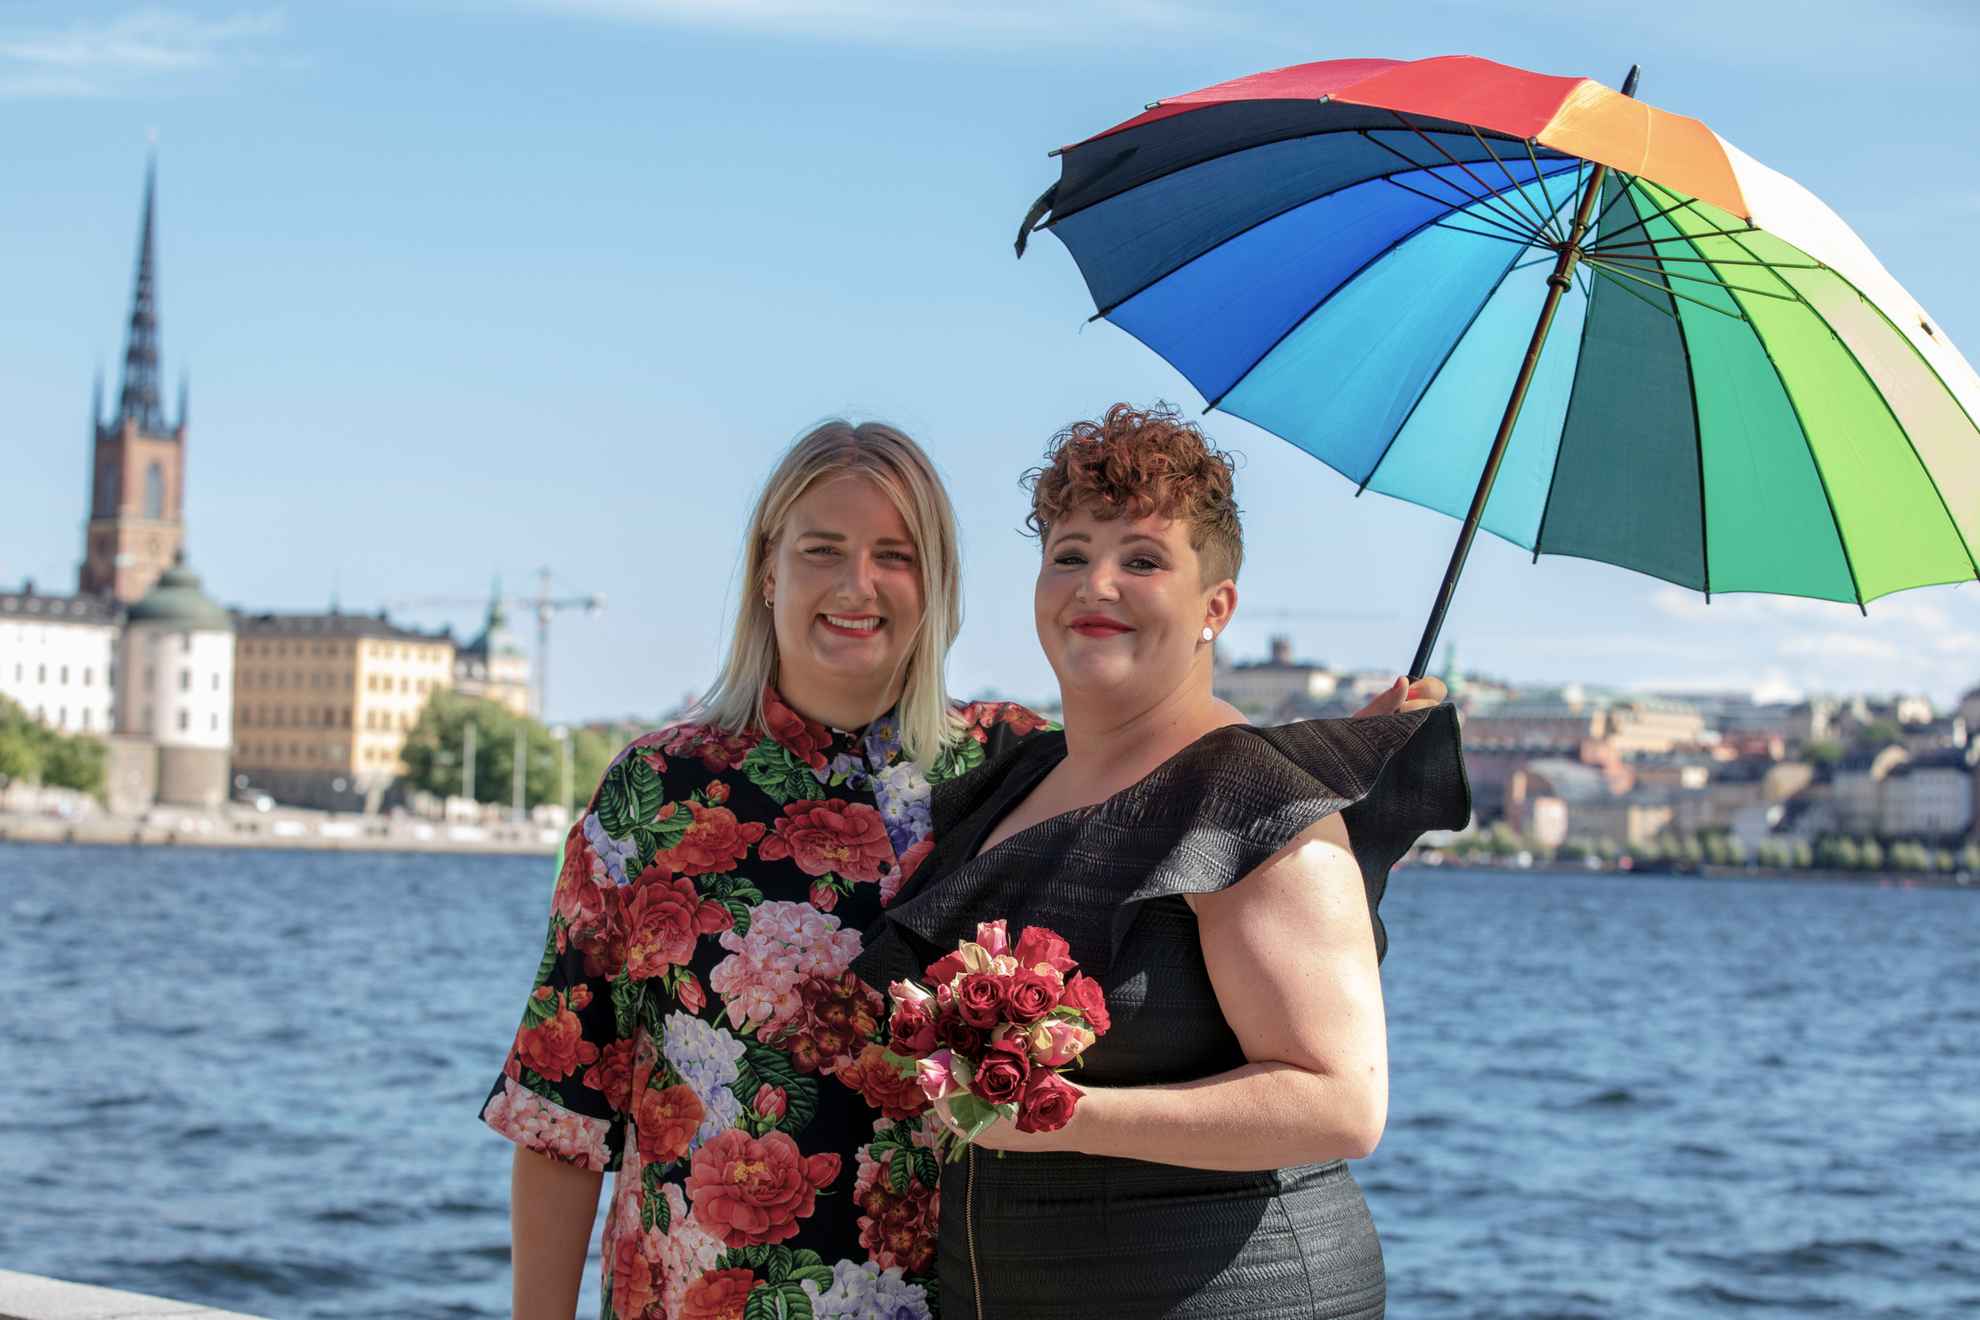 Two women, one with a black dress and one with a flower patterned shirt, are holding an umbrella whit the colors of the rainbow. They are standing by the water with a view of Stockholm city in the background.